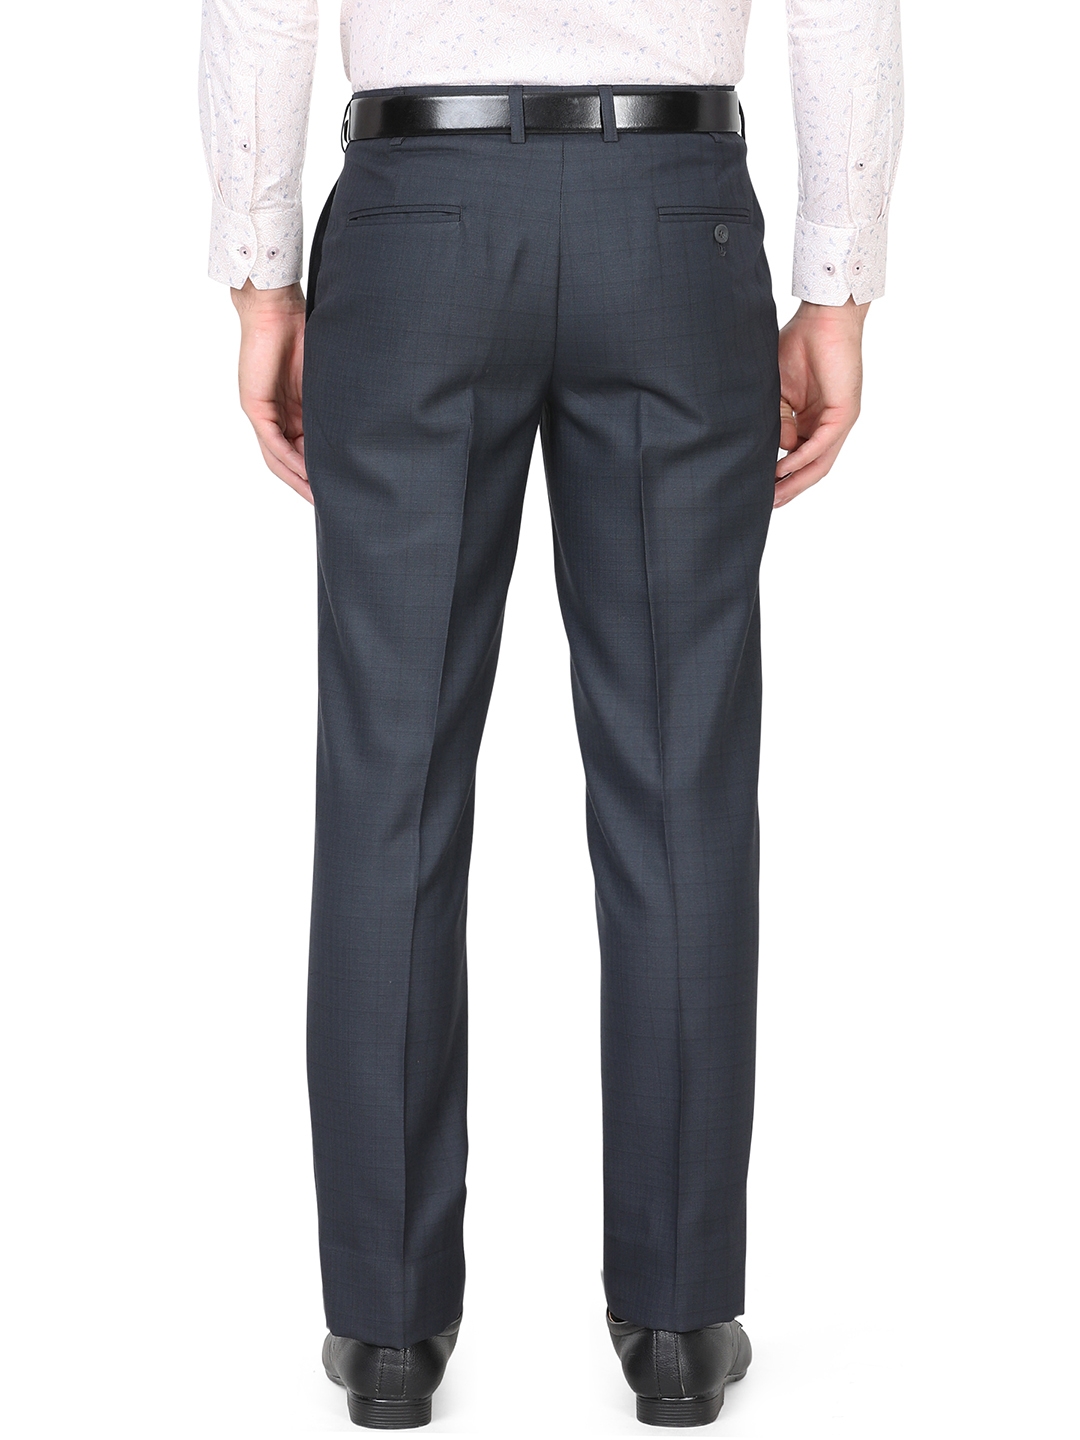 Greenfibre | Blue Checked Classic Fit Formal Trouser | Greenfibre 2